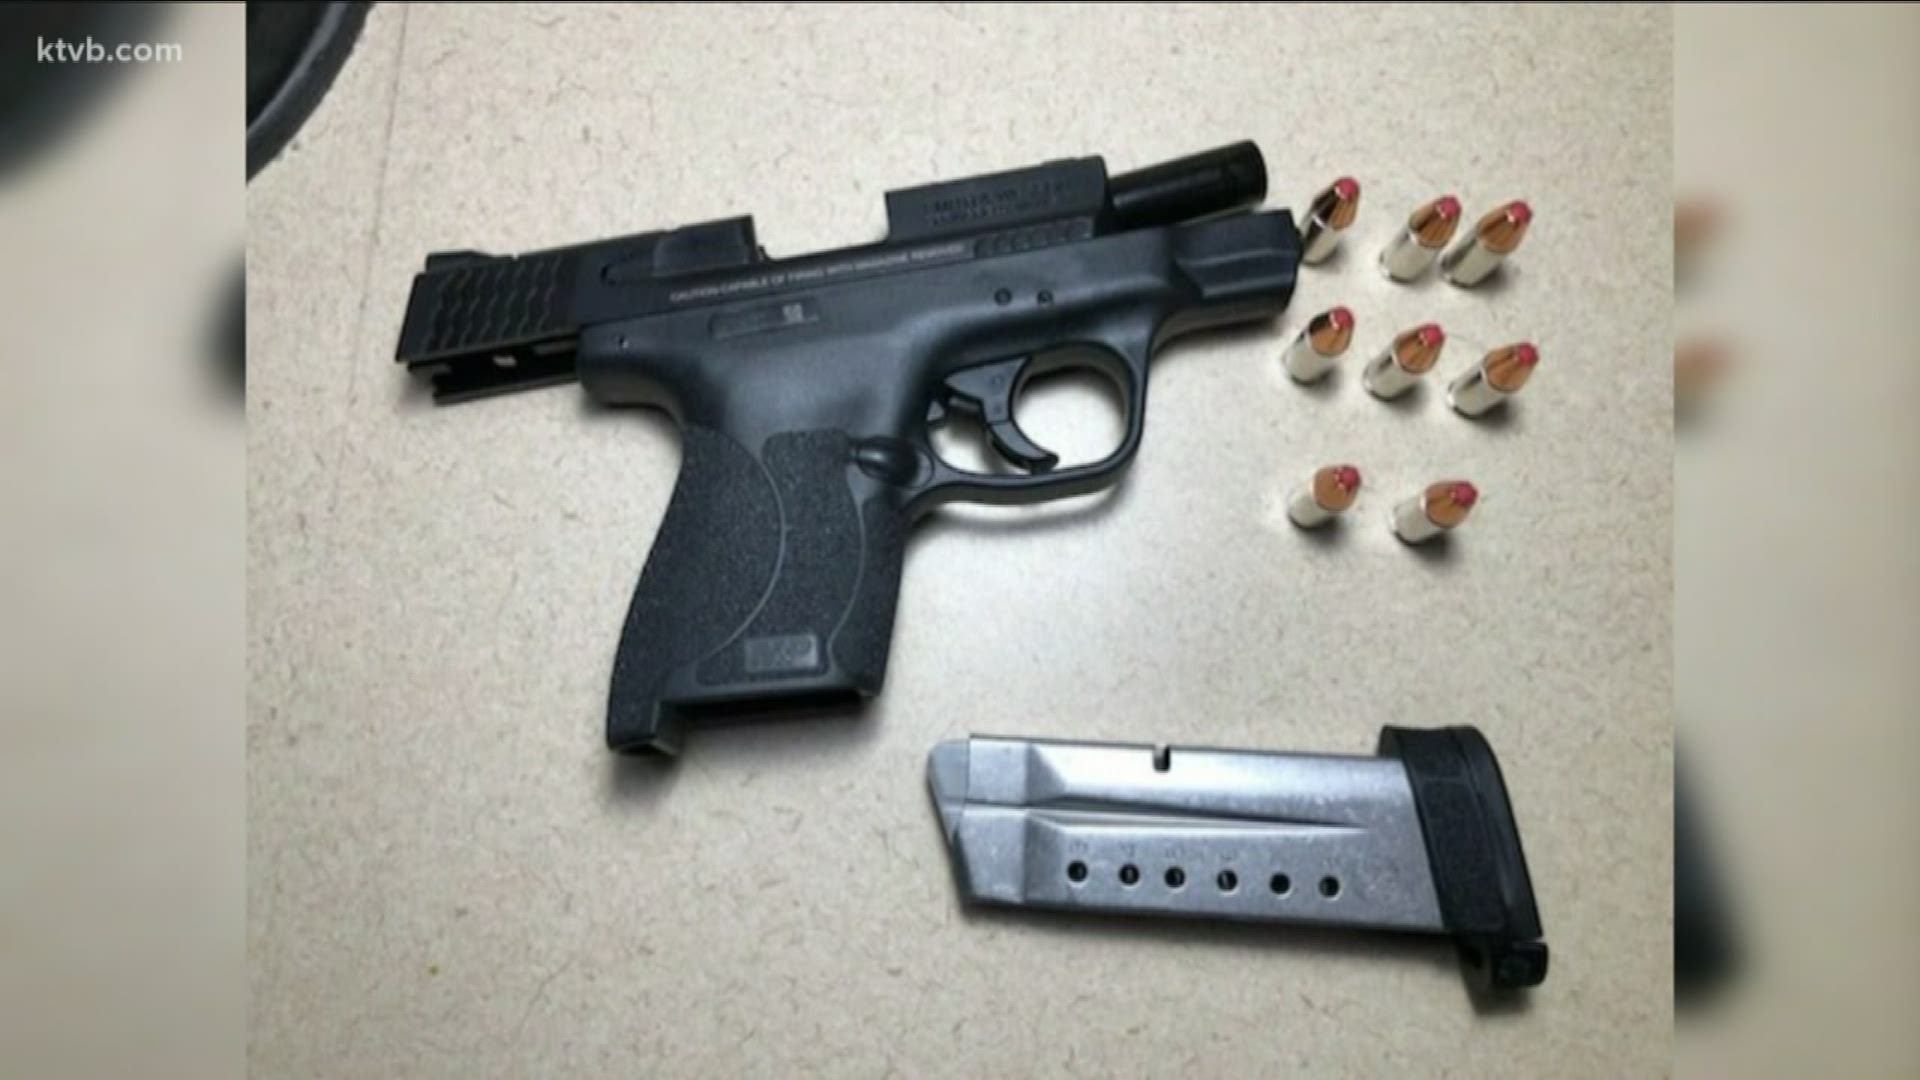 This is the second firearm that Boise Airport TSA officers have discovered in 2020.